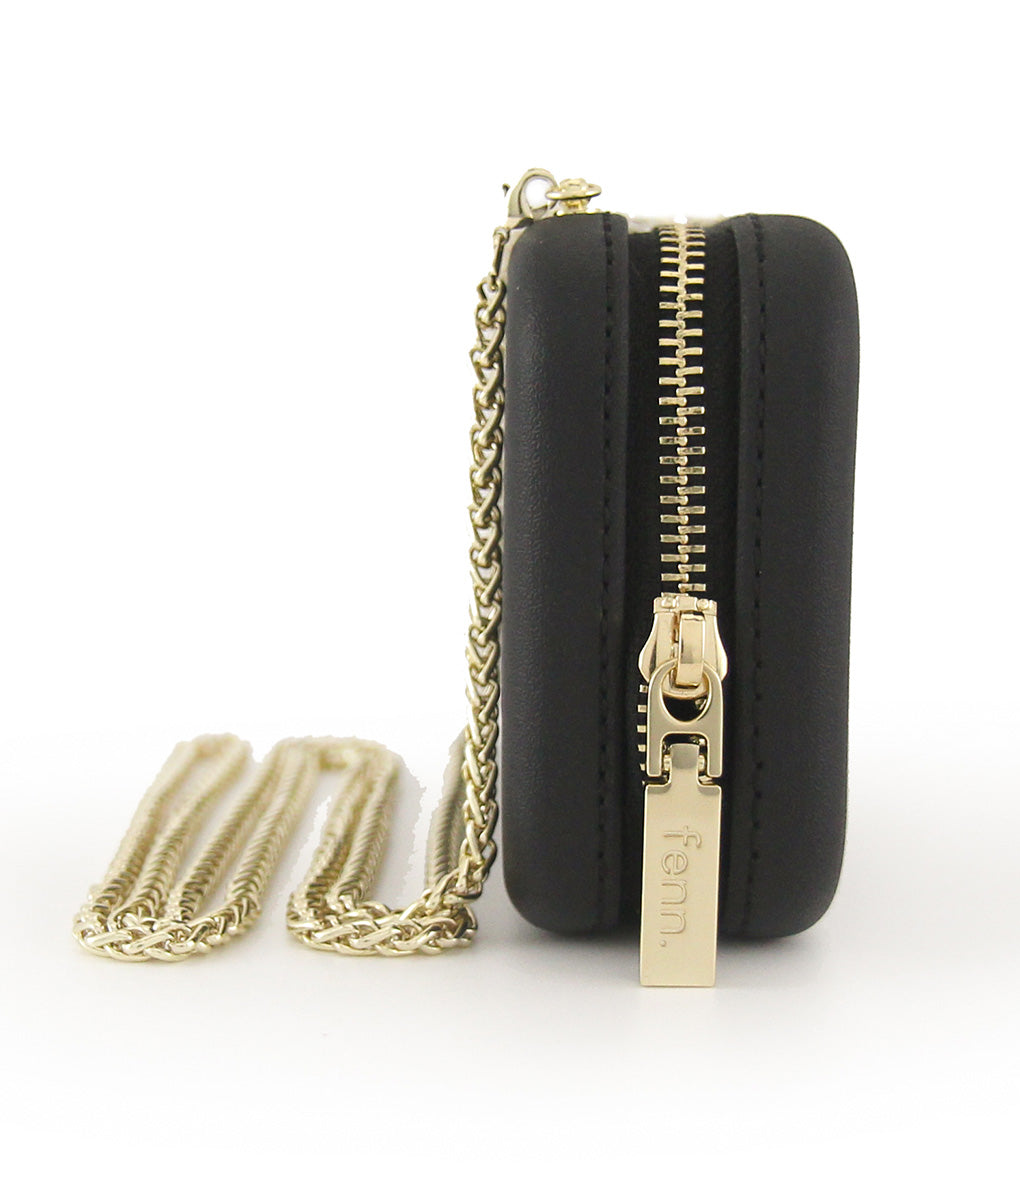 BLACK purse with gold chain strap